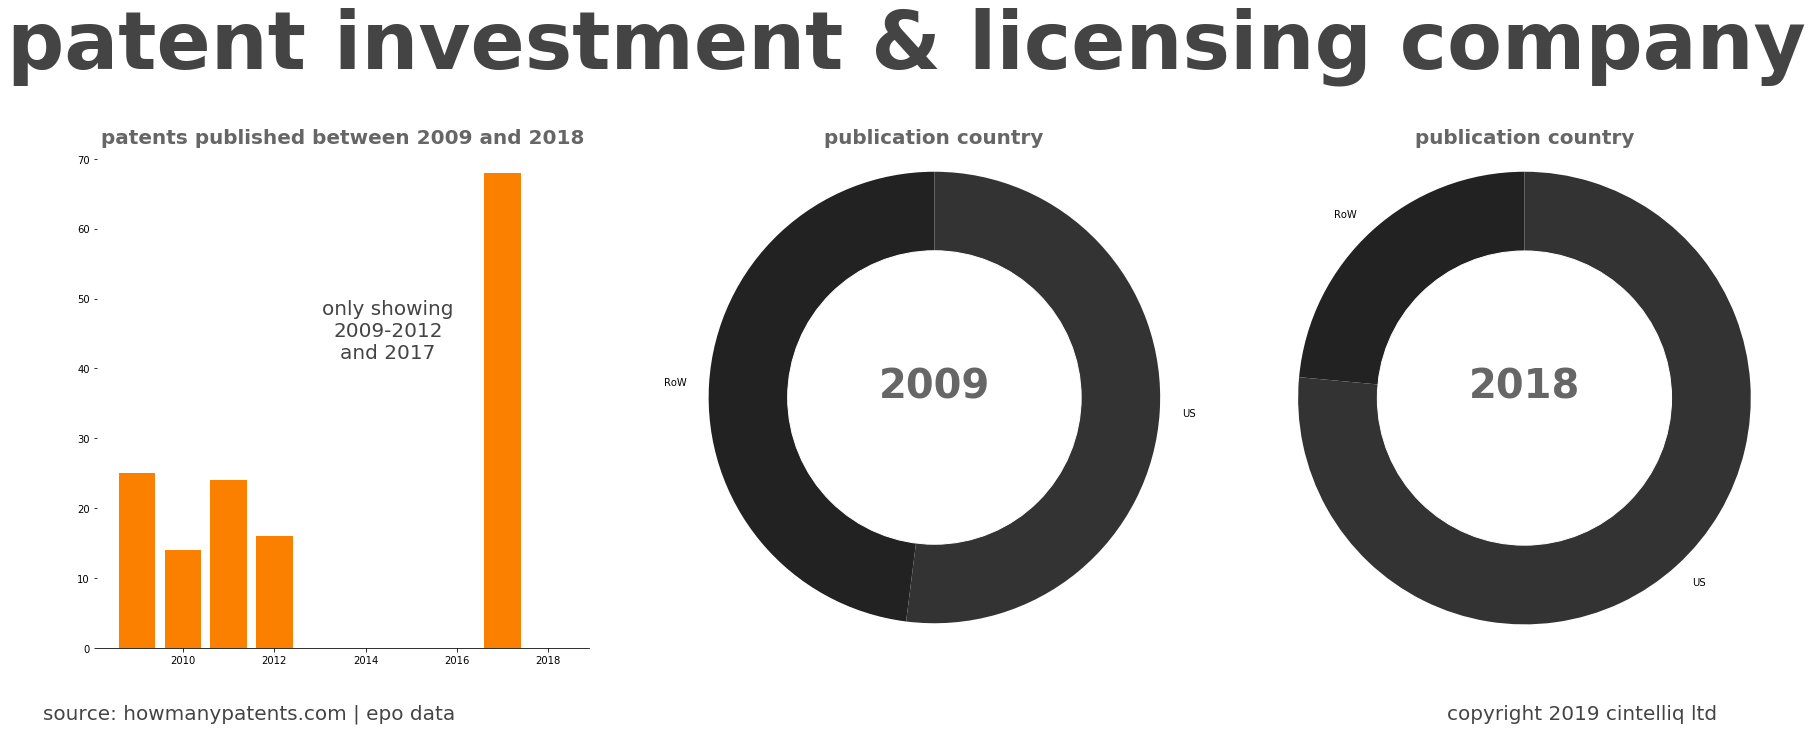 summary of patents for Patent Investment & Licensing Company